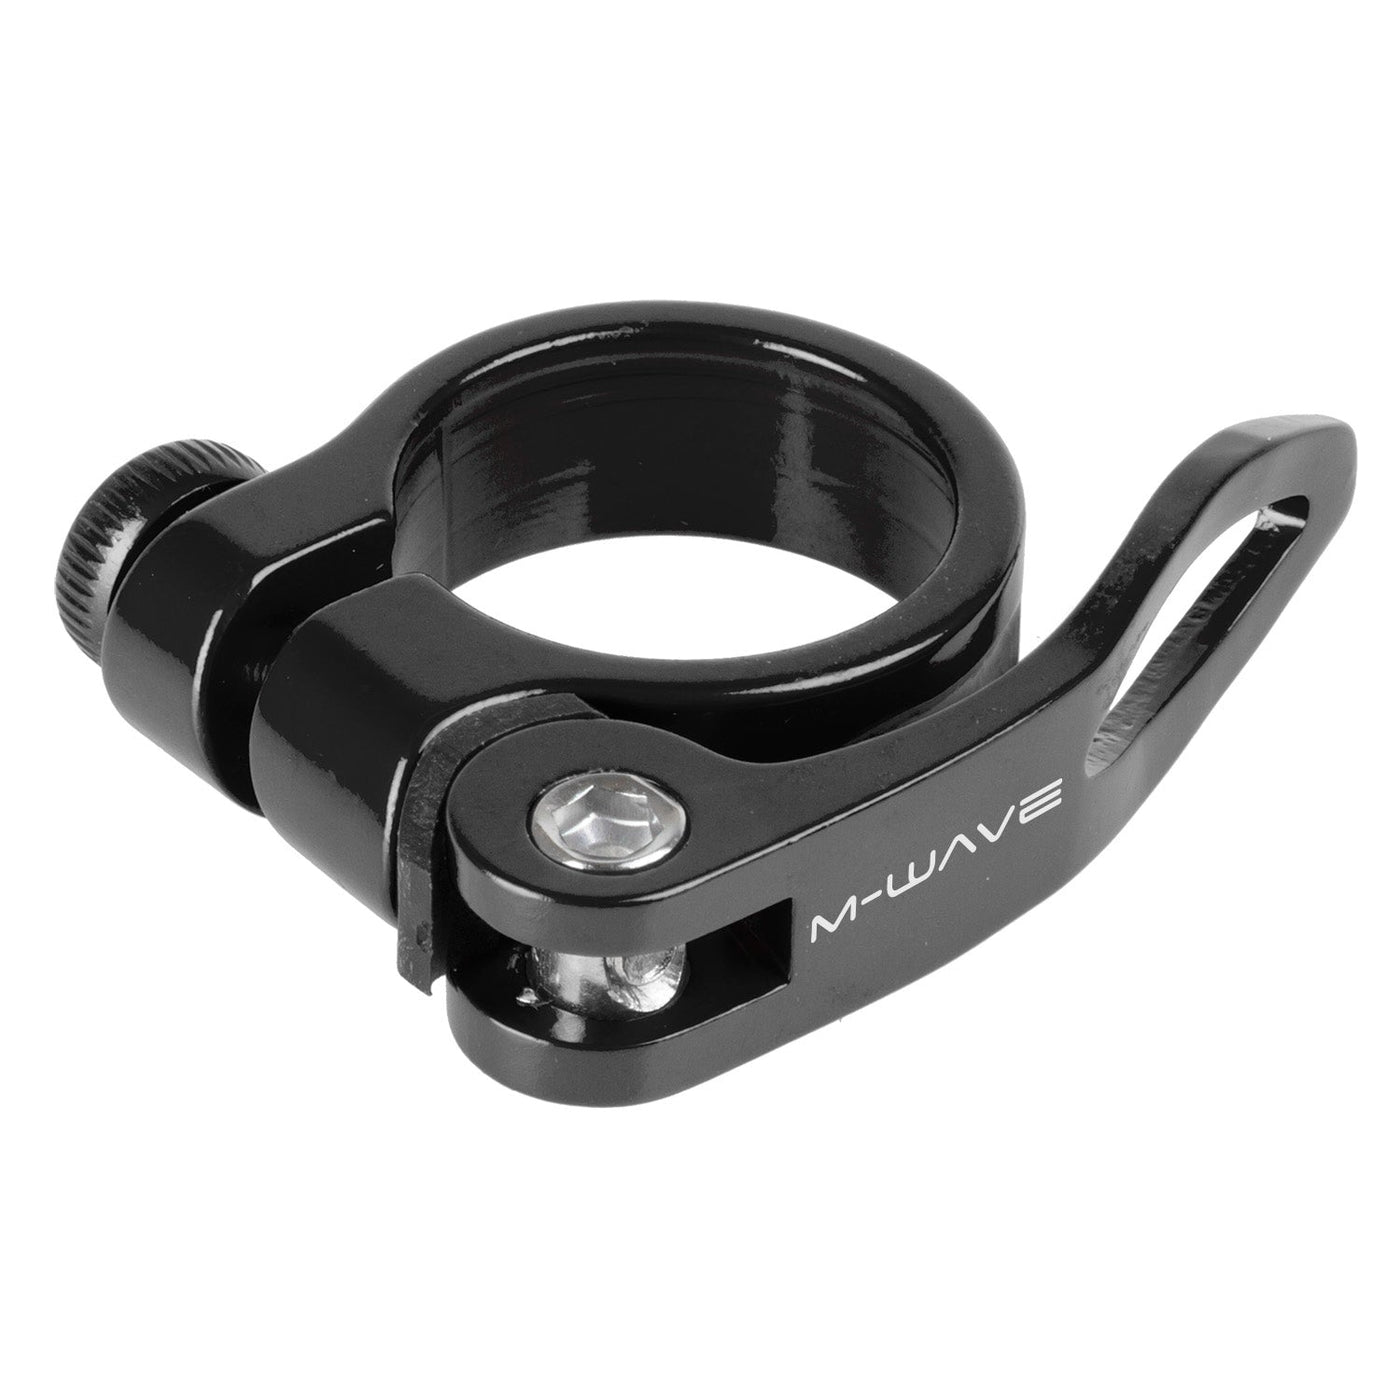 M-Wave Clampy QR Seat Tube Clamp - Cyclop.in